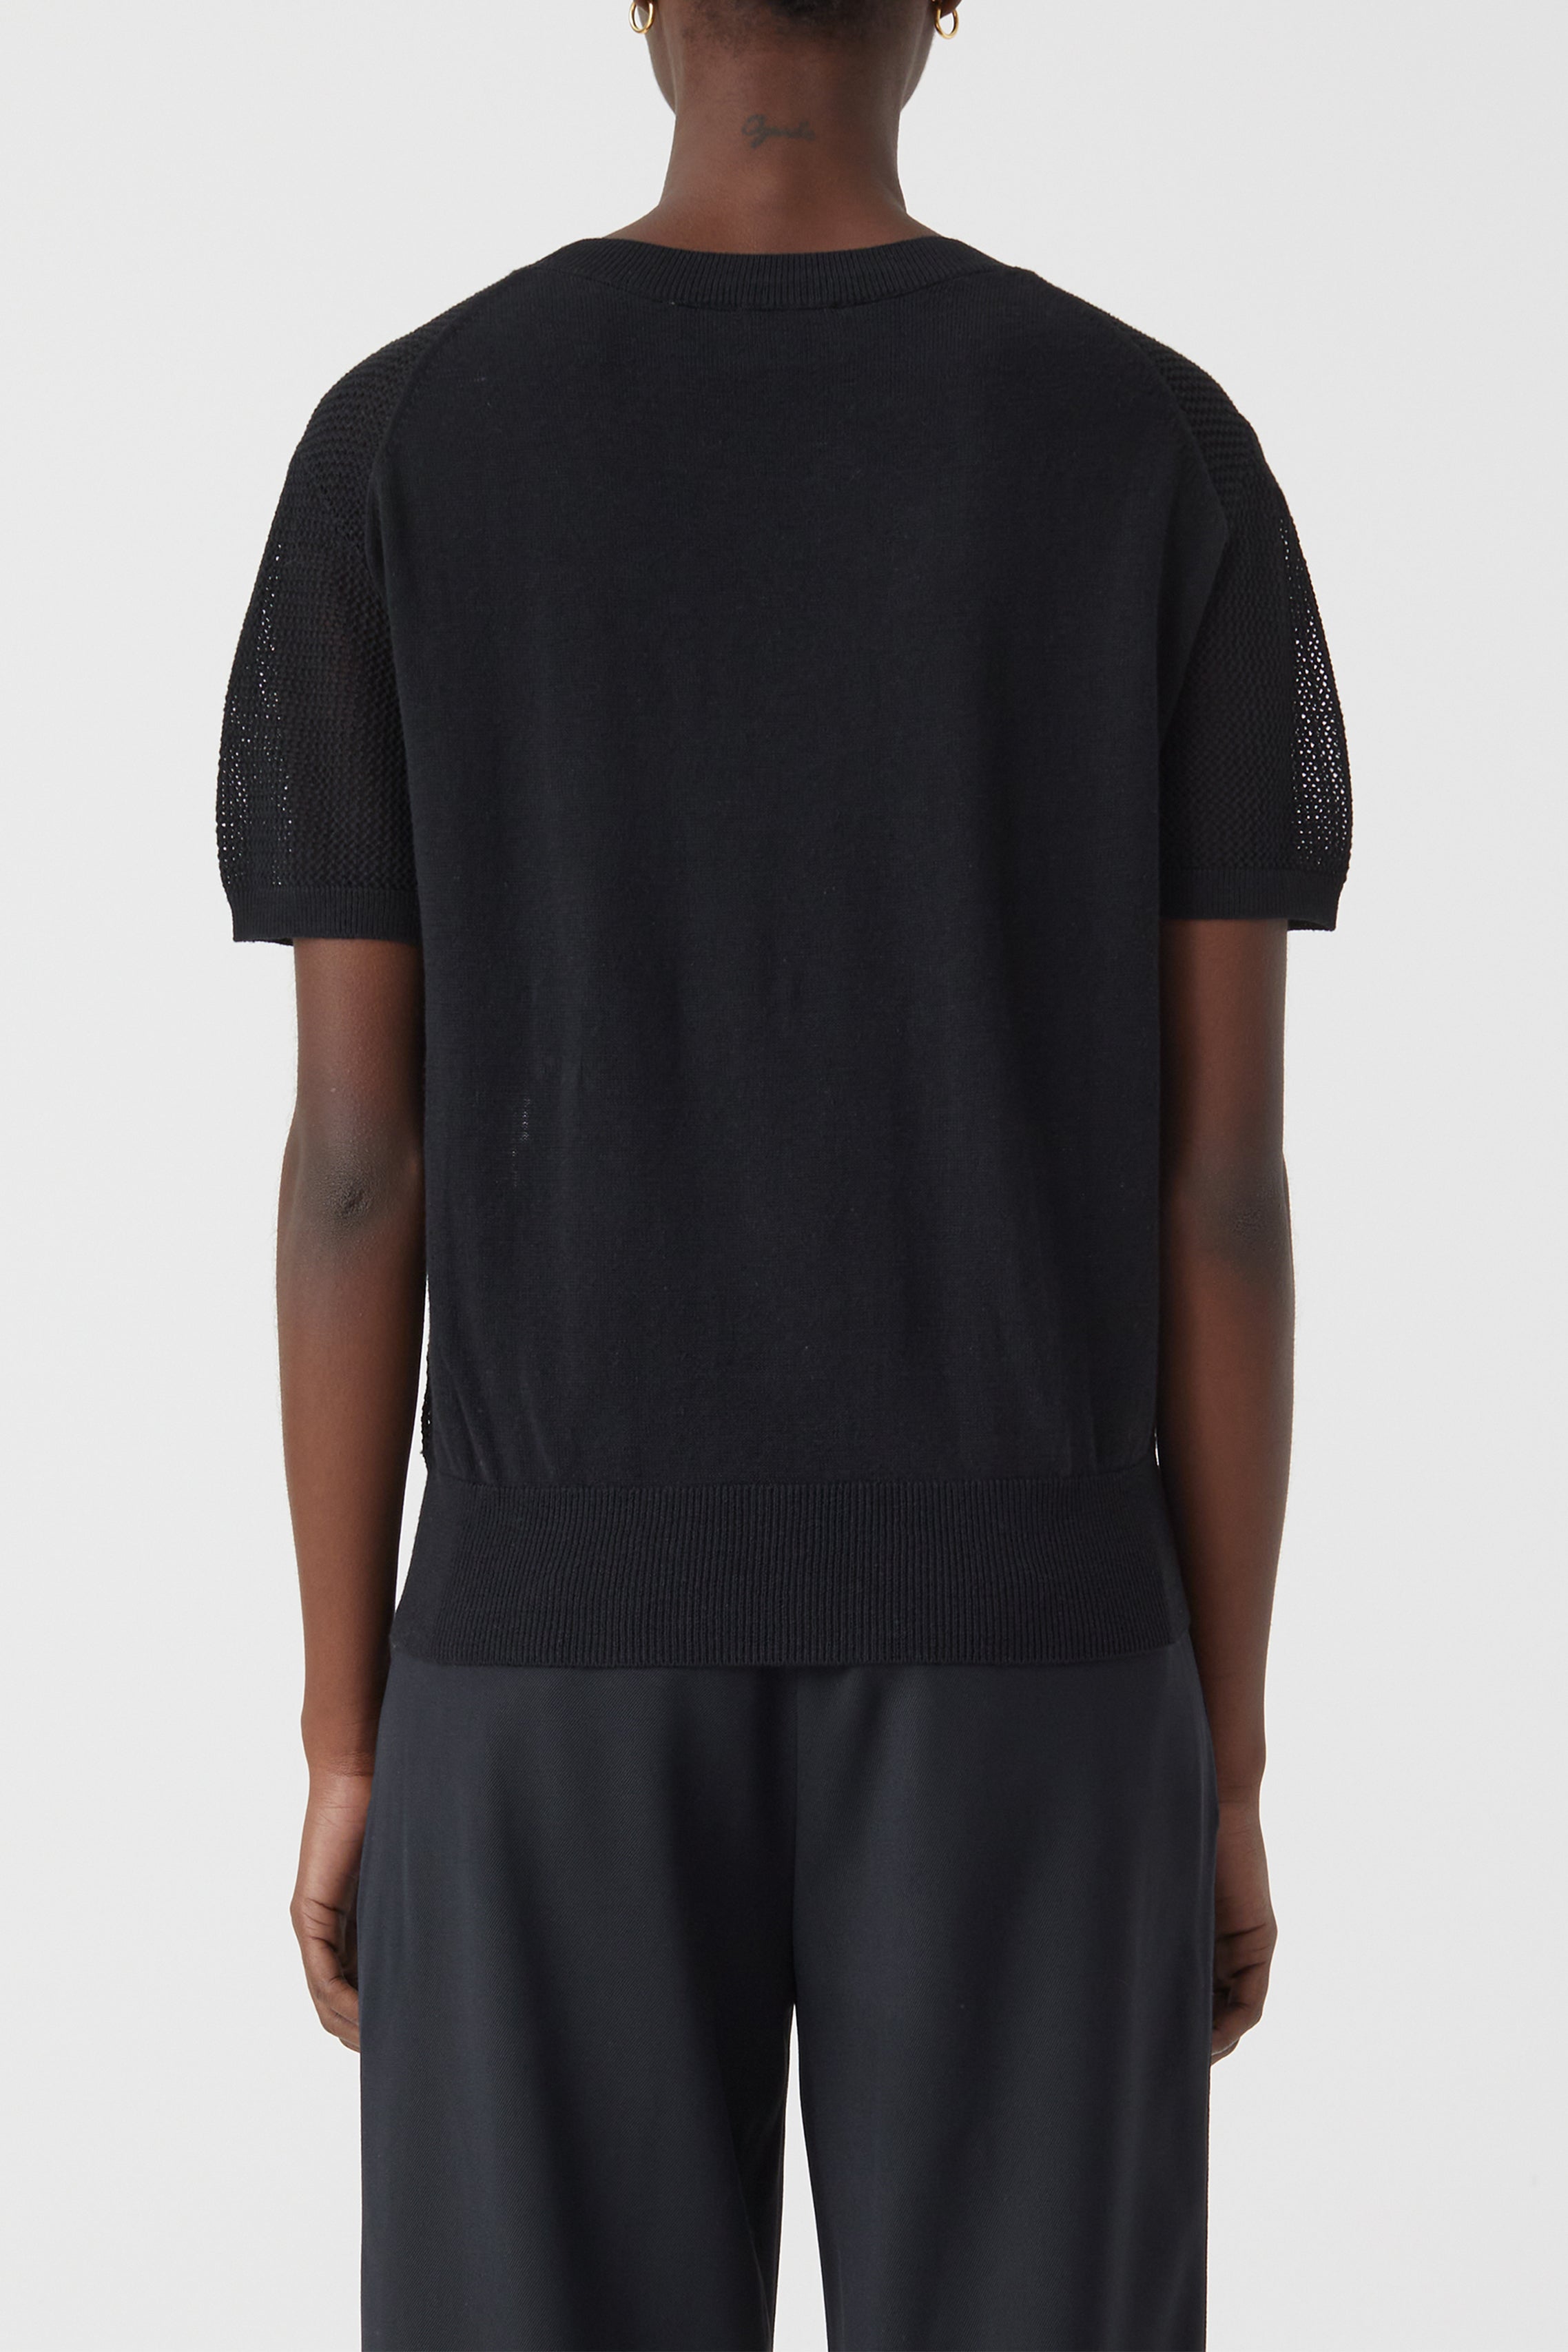 CLOSED-OUTLET-SALE-CREW-NECK-SHORT-SLEEVE-Strick-ARCHIVE-COLLECTION-2.jpg